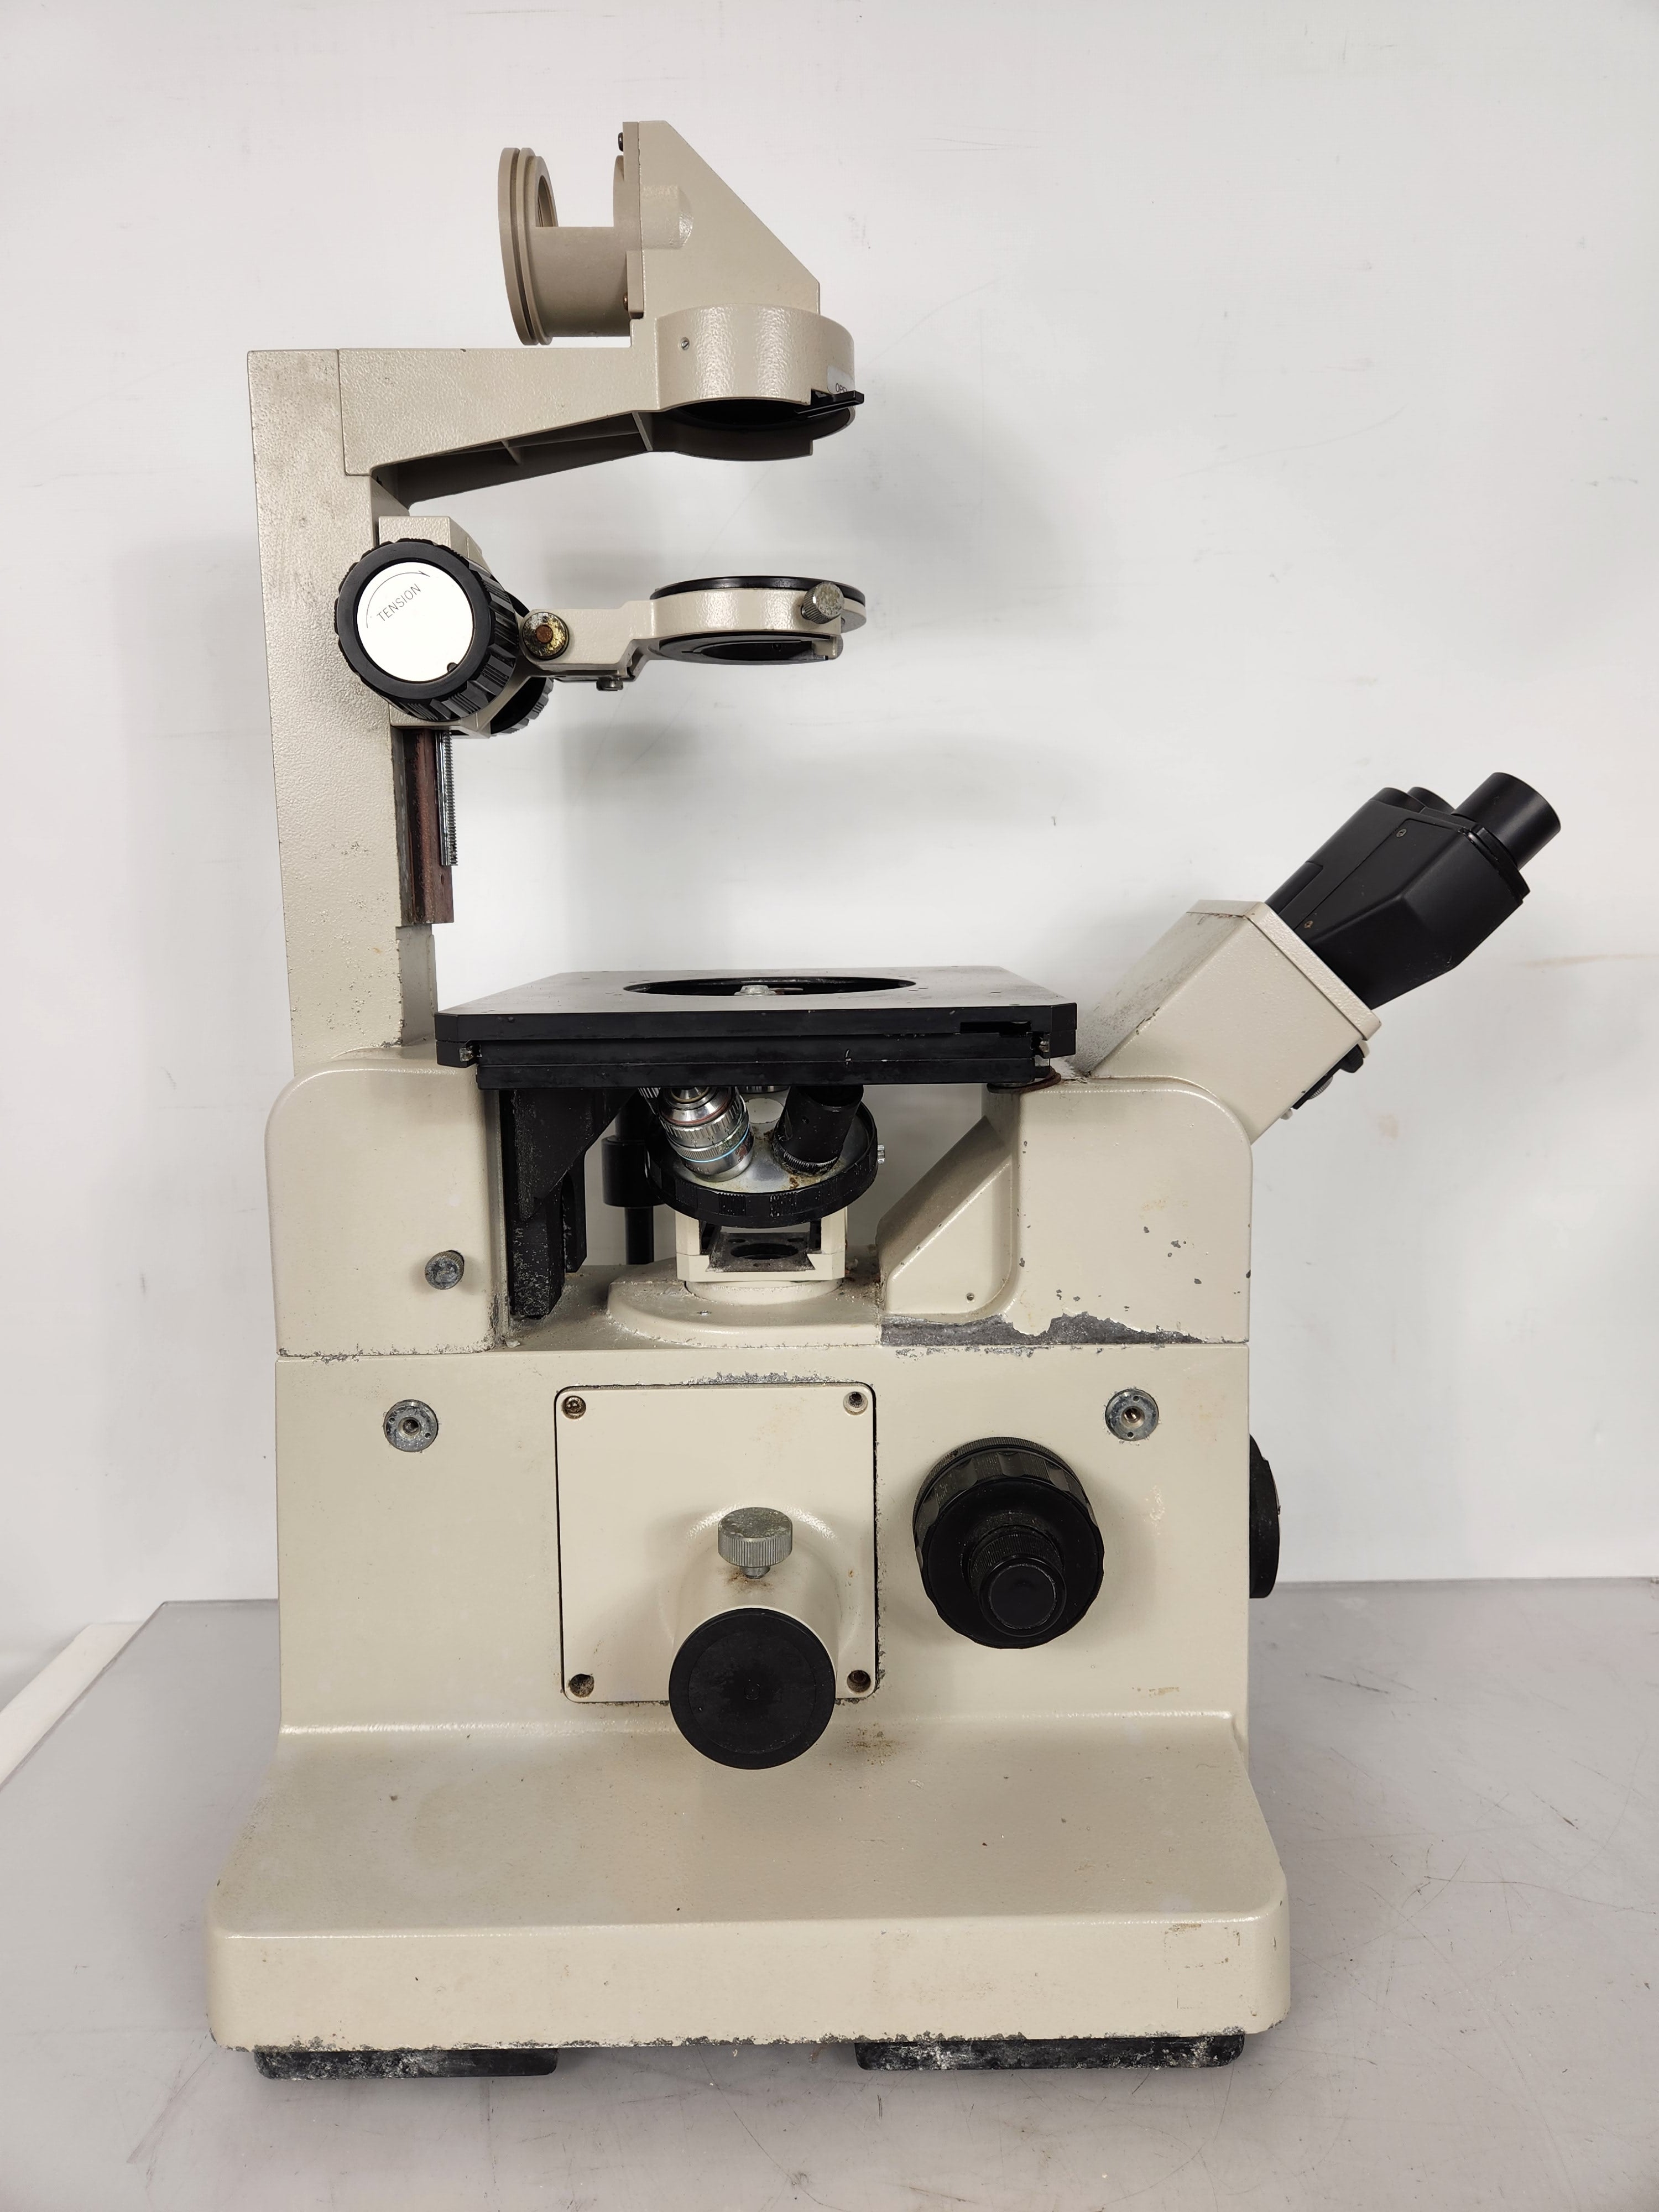 Nikon Diaphot Inverted Microscope *For Parts or Repair*